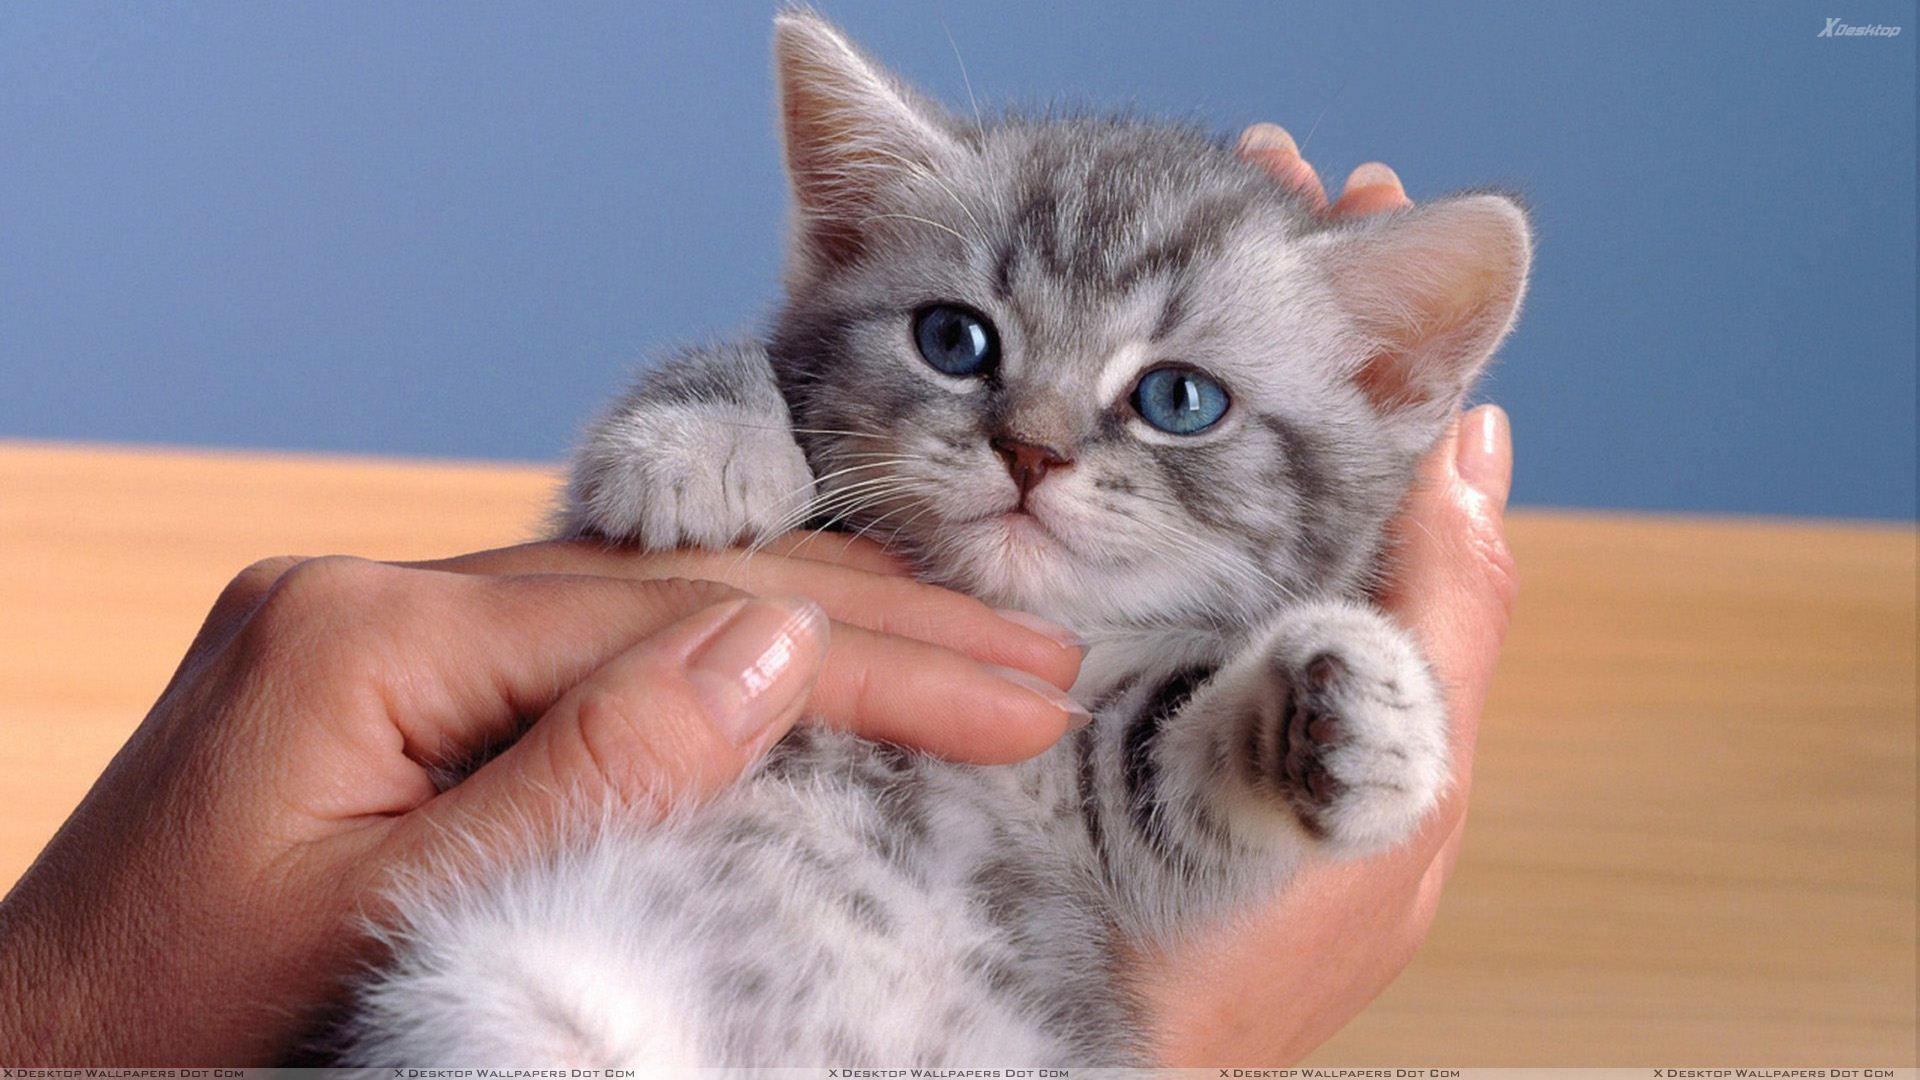 Small Cat In Hand Looking Very Cute Wallpaper Funny Cat Wallpaper